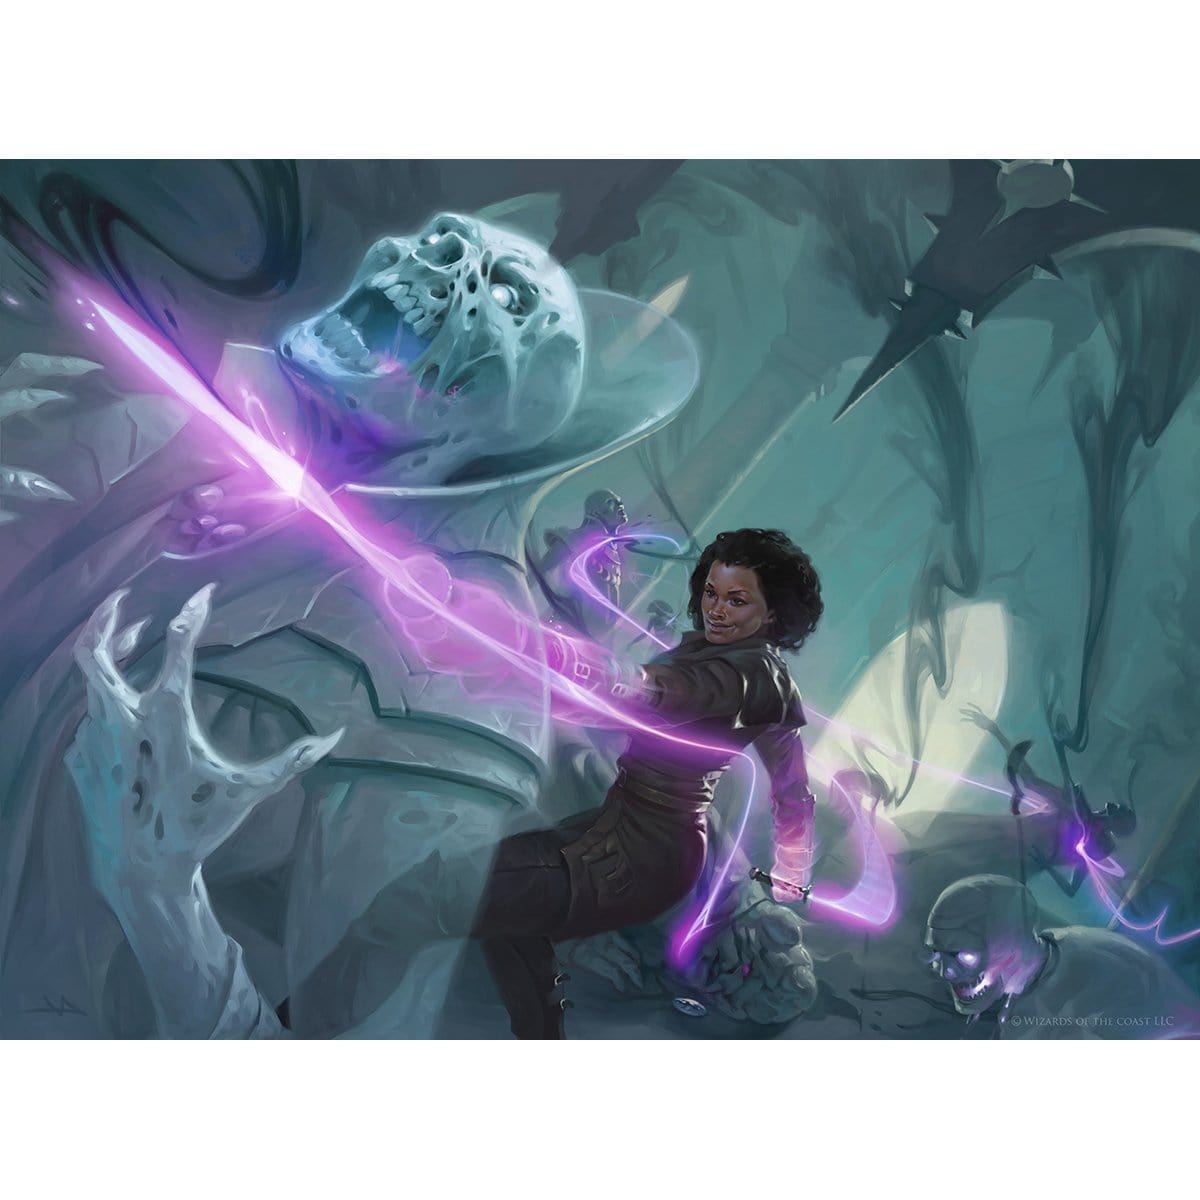 Kaya’s Wrath Print - Print - Original Magic Art - Accessories for Magic the Gathering and other card games